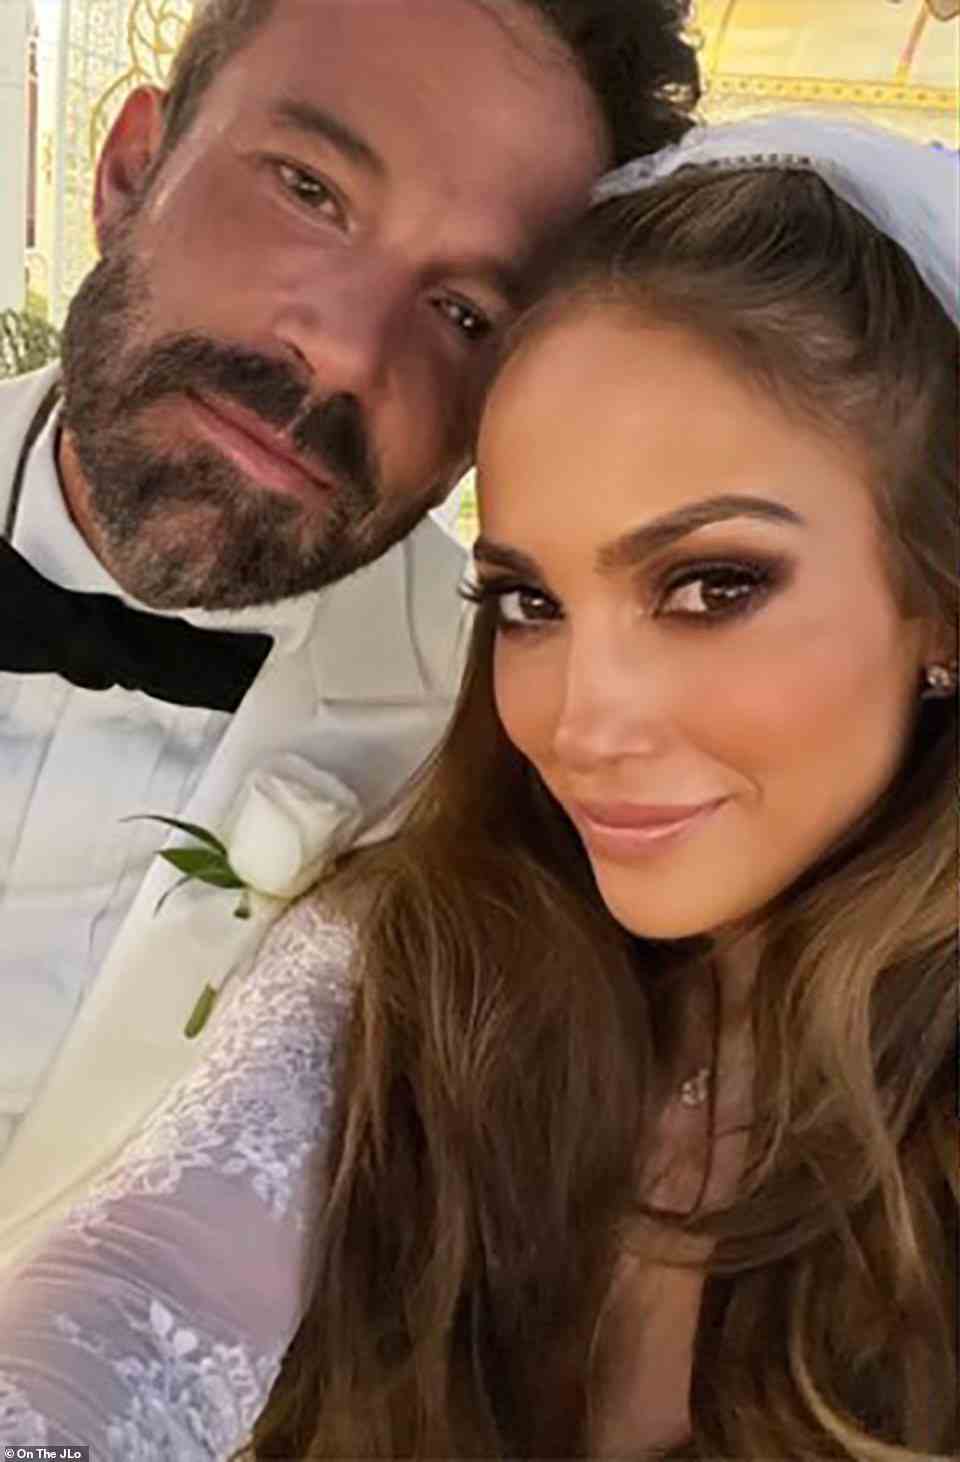 Jennifer Lopez, 52, and Ben Affleck, 49, officially became husband and wife last weekend, tying the knot with an intimate Las Vegas wedding - 20 years after the couple first got together